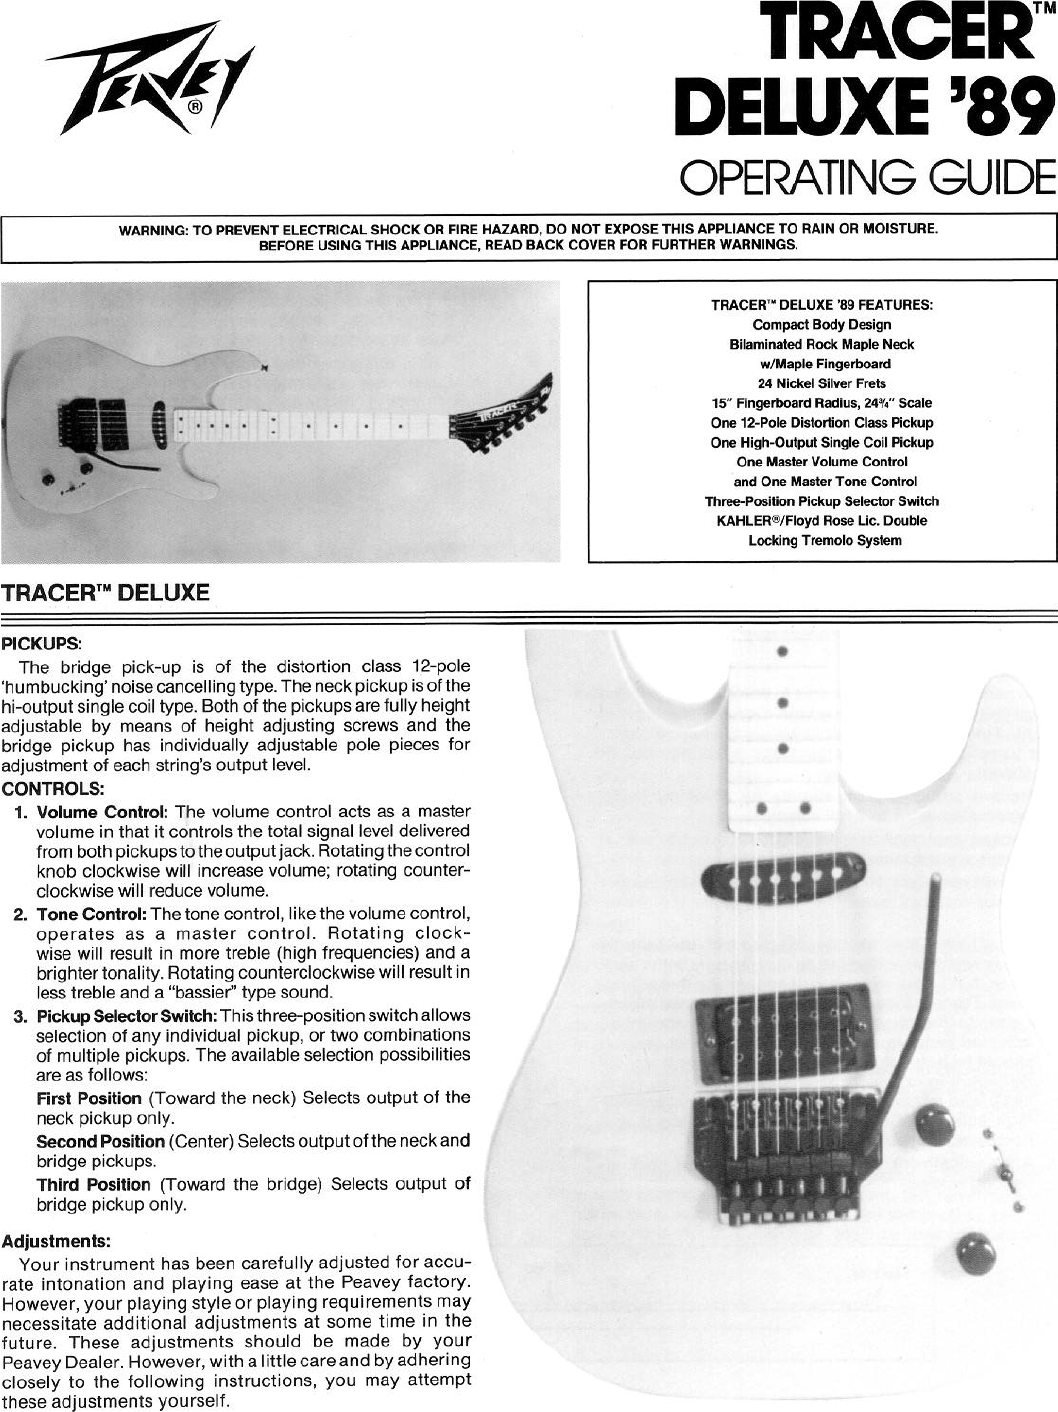 Peavey Tracer Deluxe 89 Users Manual